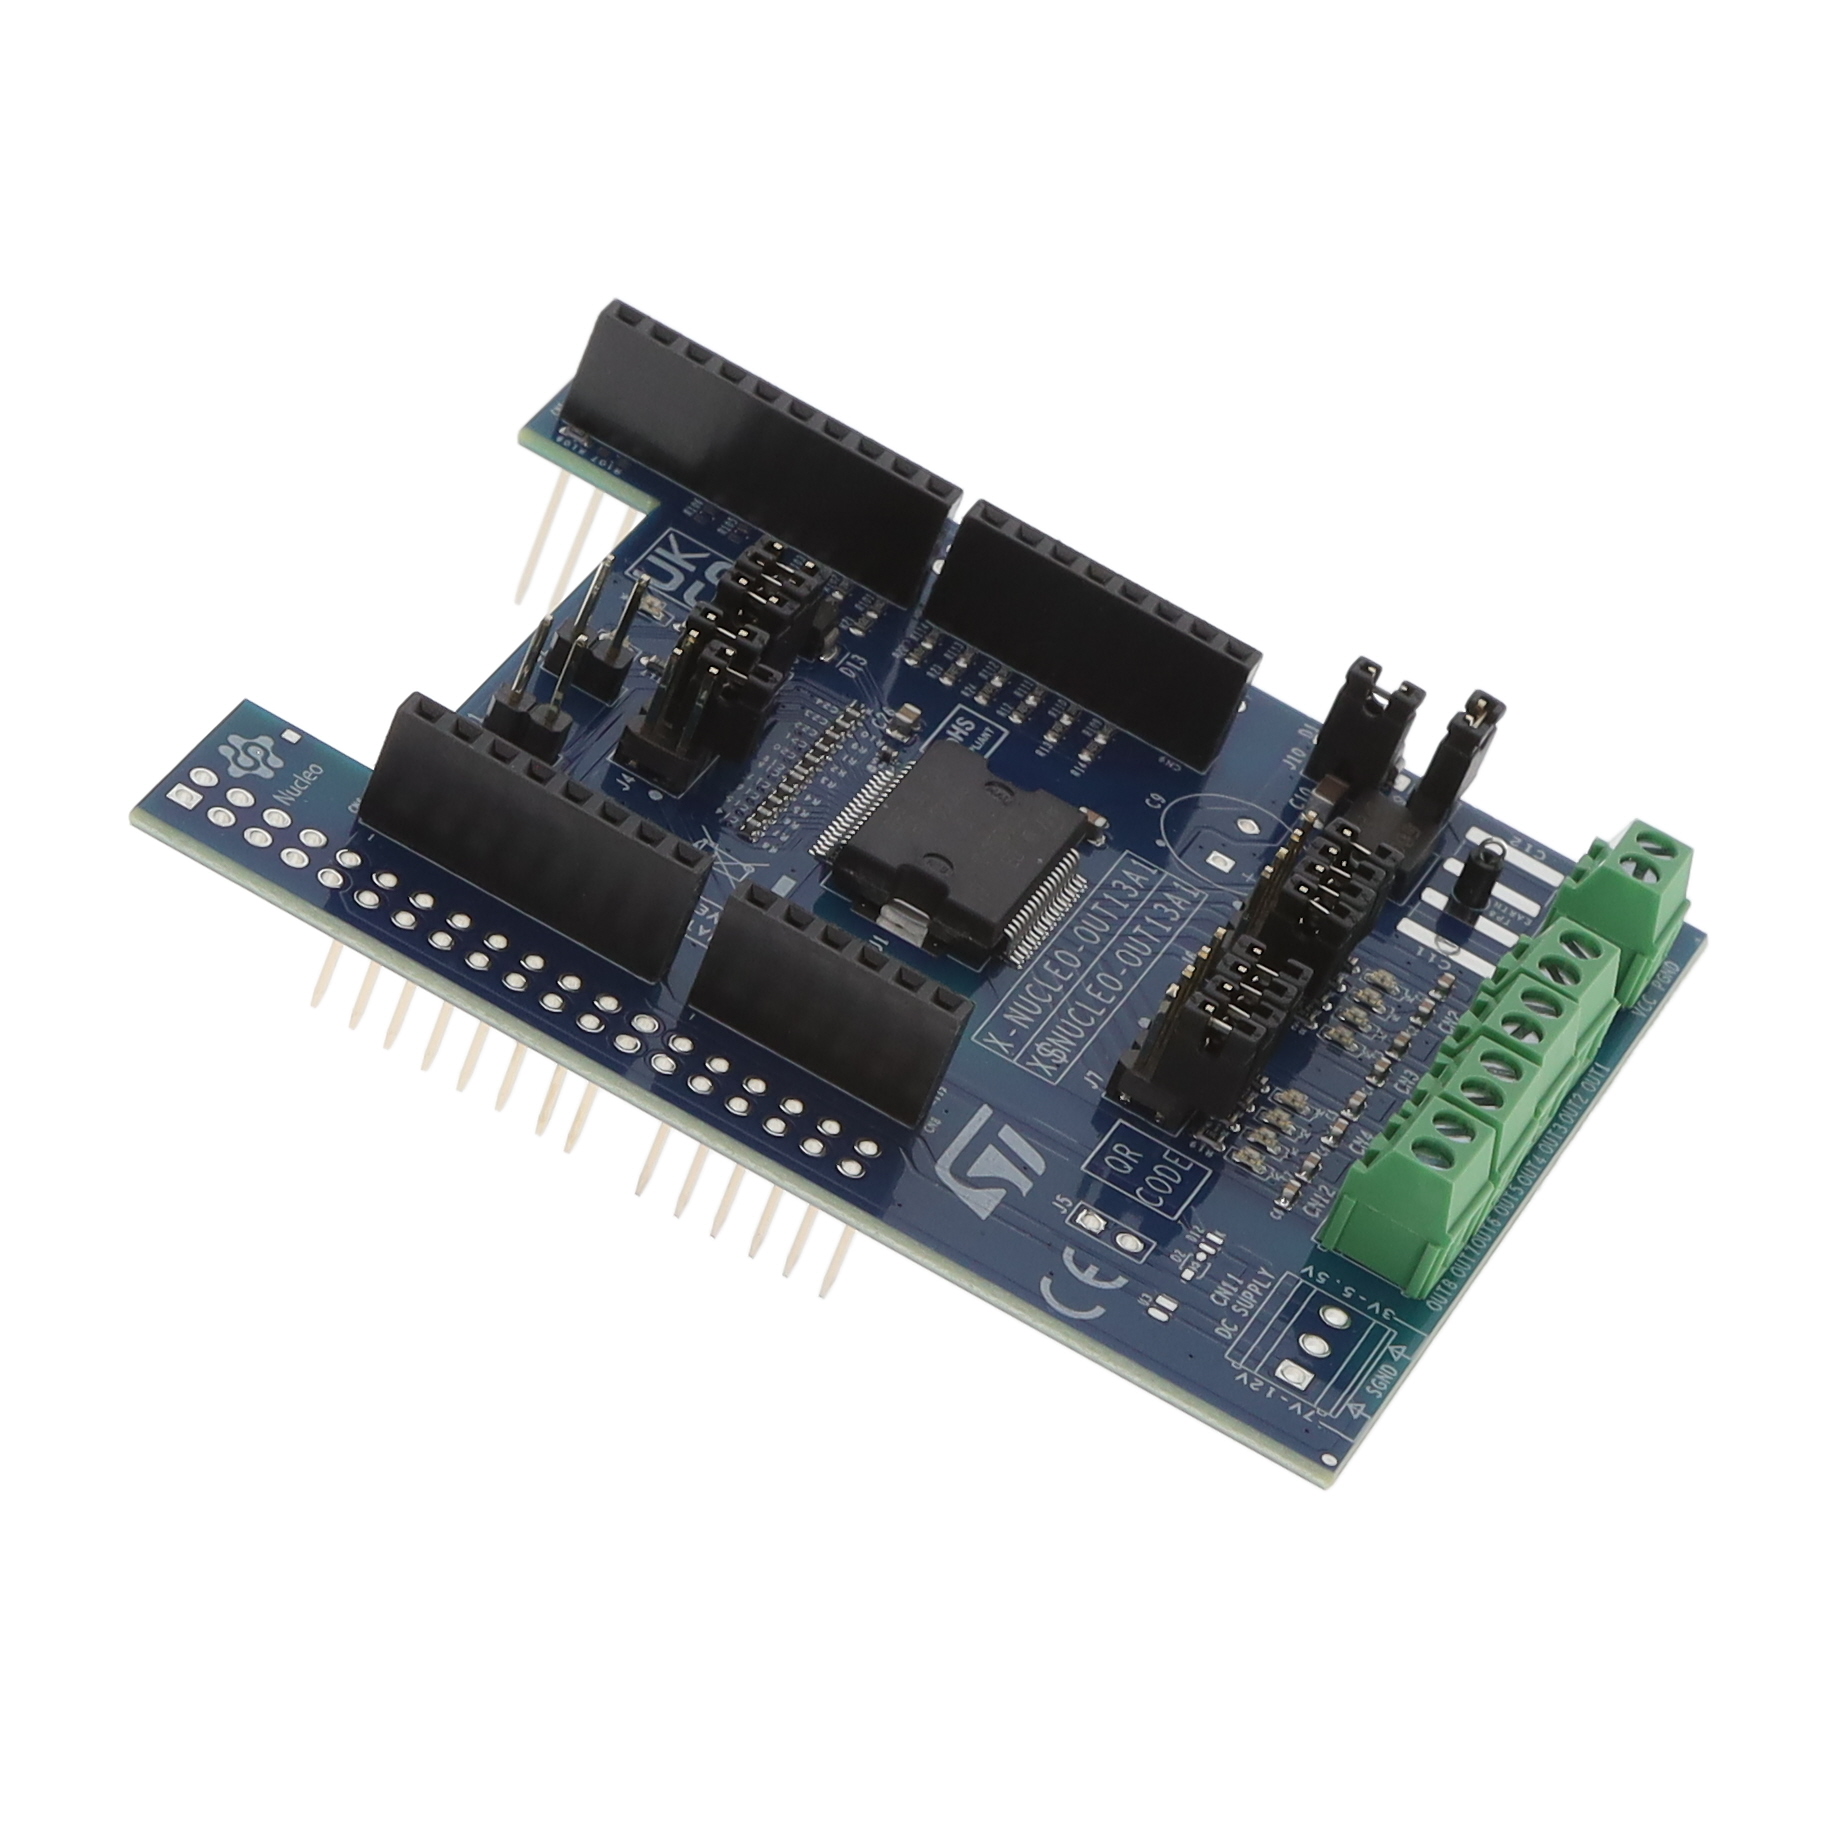 【X-NUCLEO-OUT13A1】NUCLEO BOARD ISO808-1